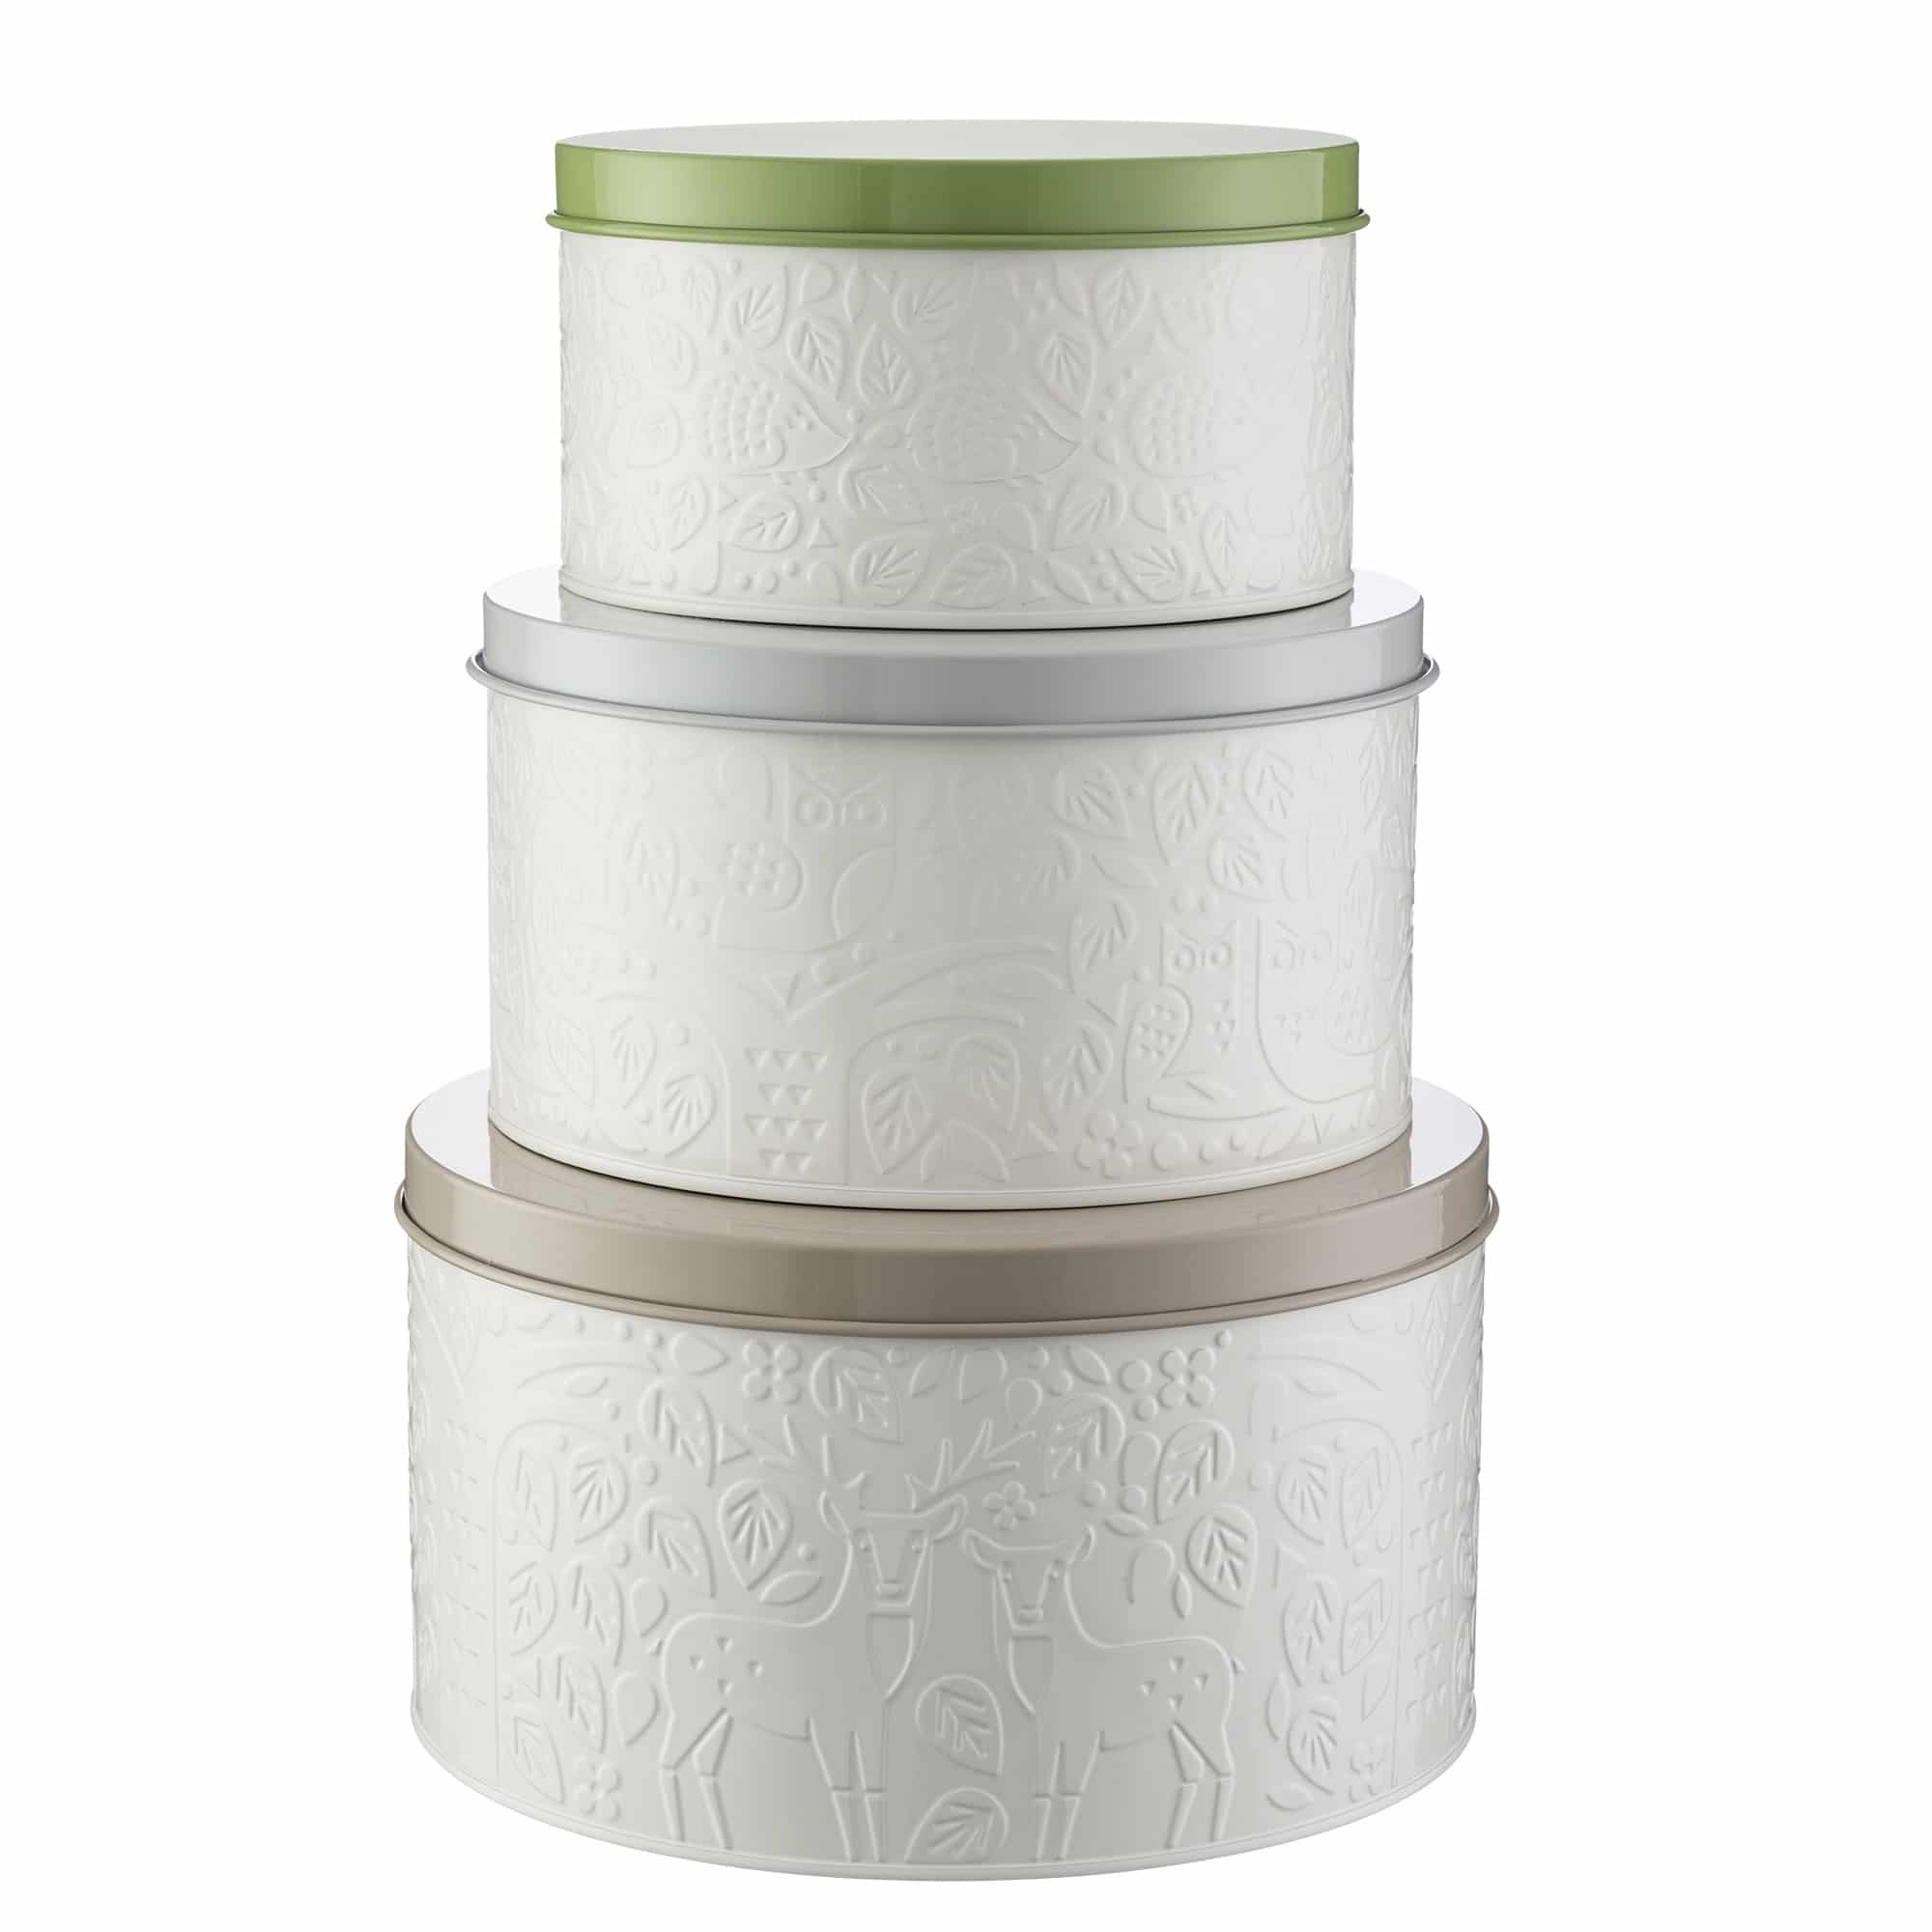 Mason Cash In The Forest Cake Tins Set of 3